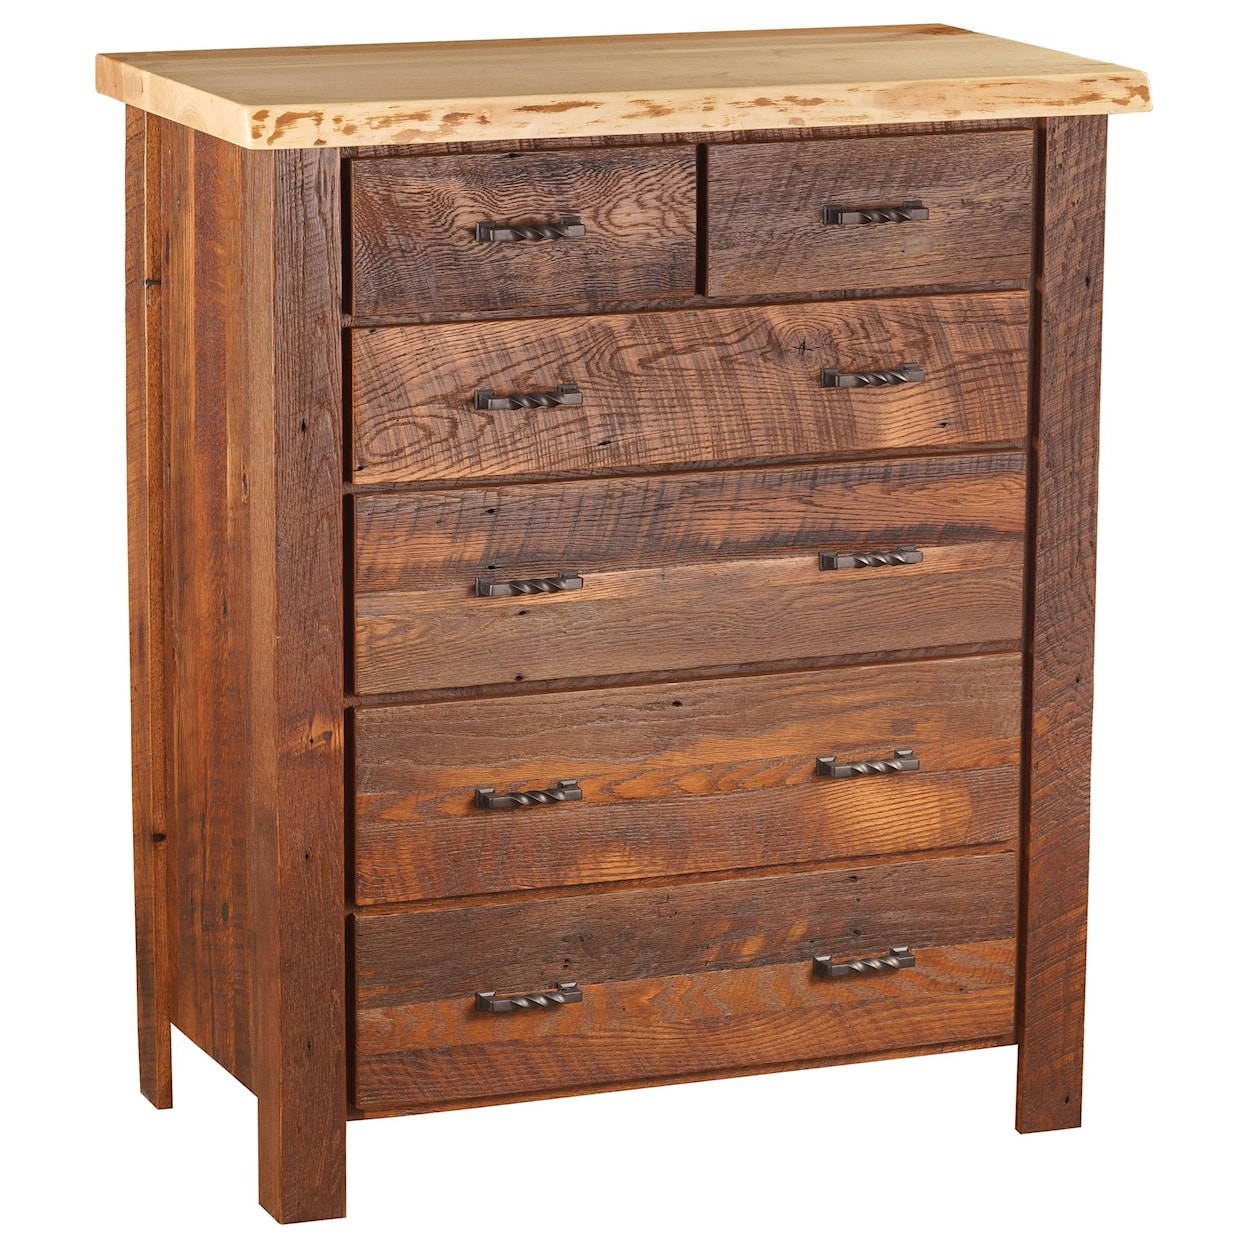 Deer Valley Woodworking Timber Creek 6 Drawer Chest